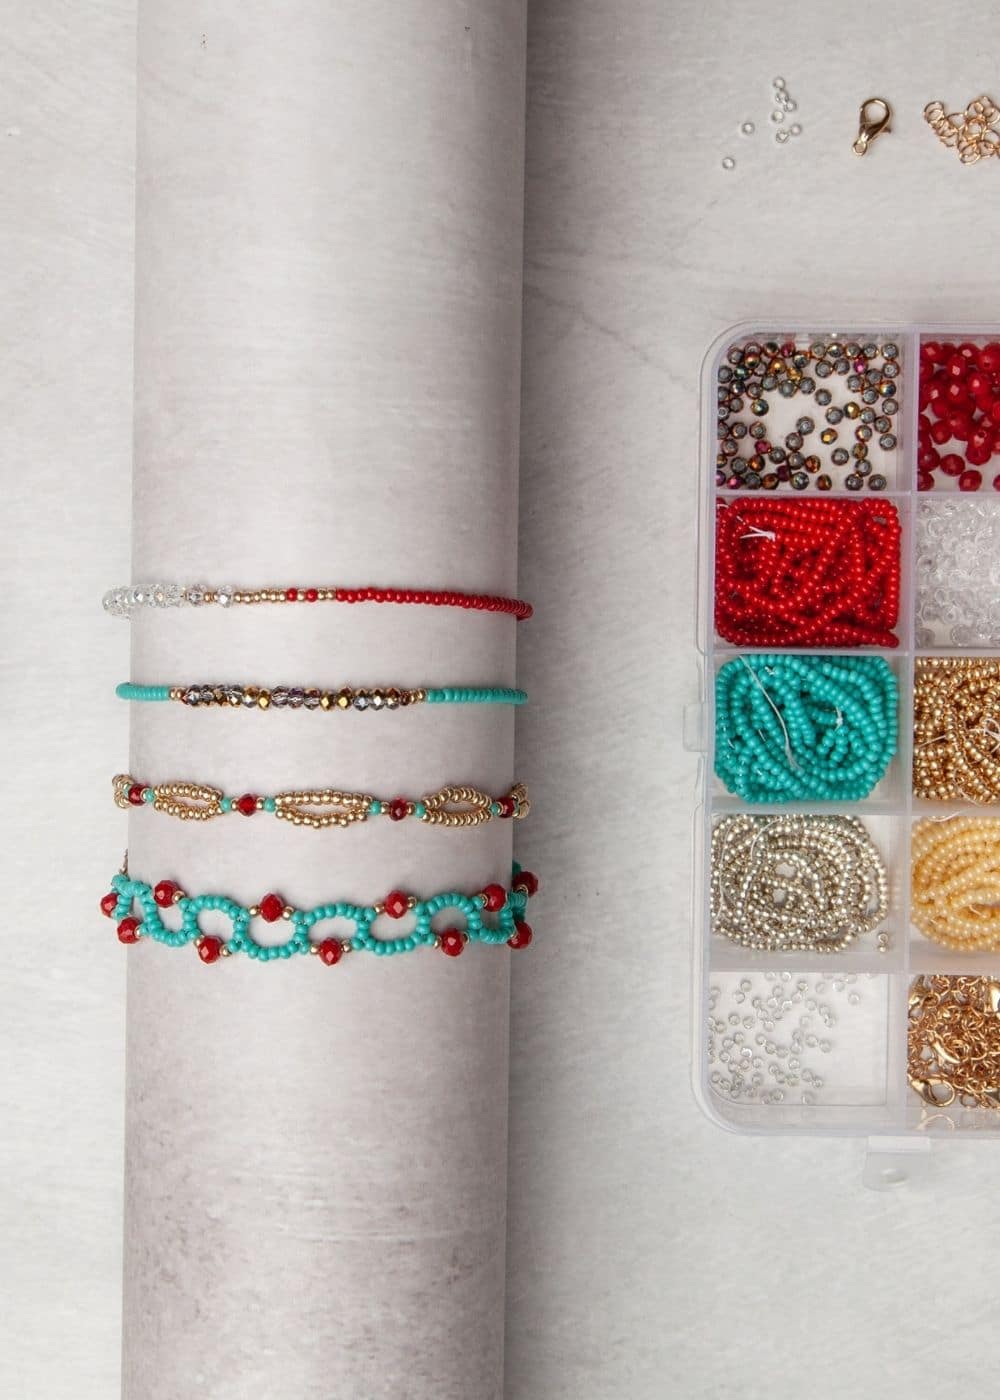 A set of bracelets and beads on a table.